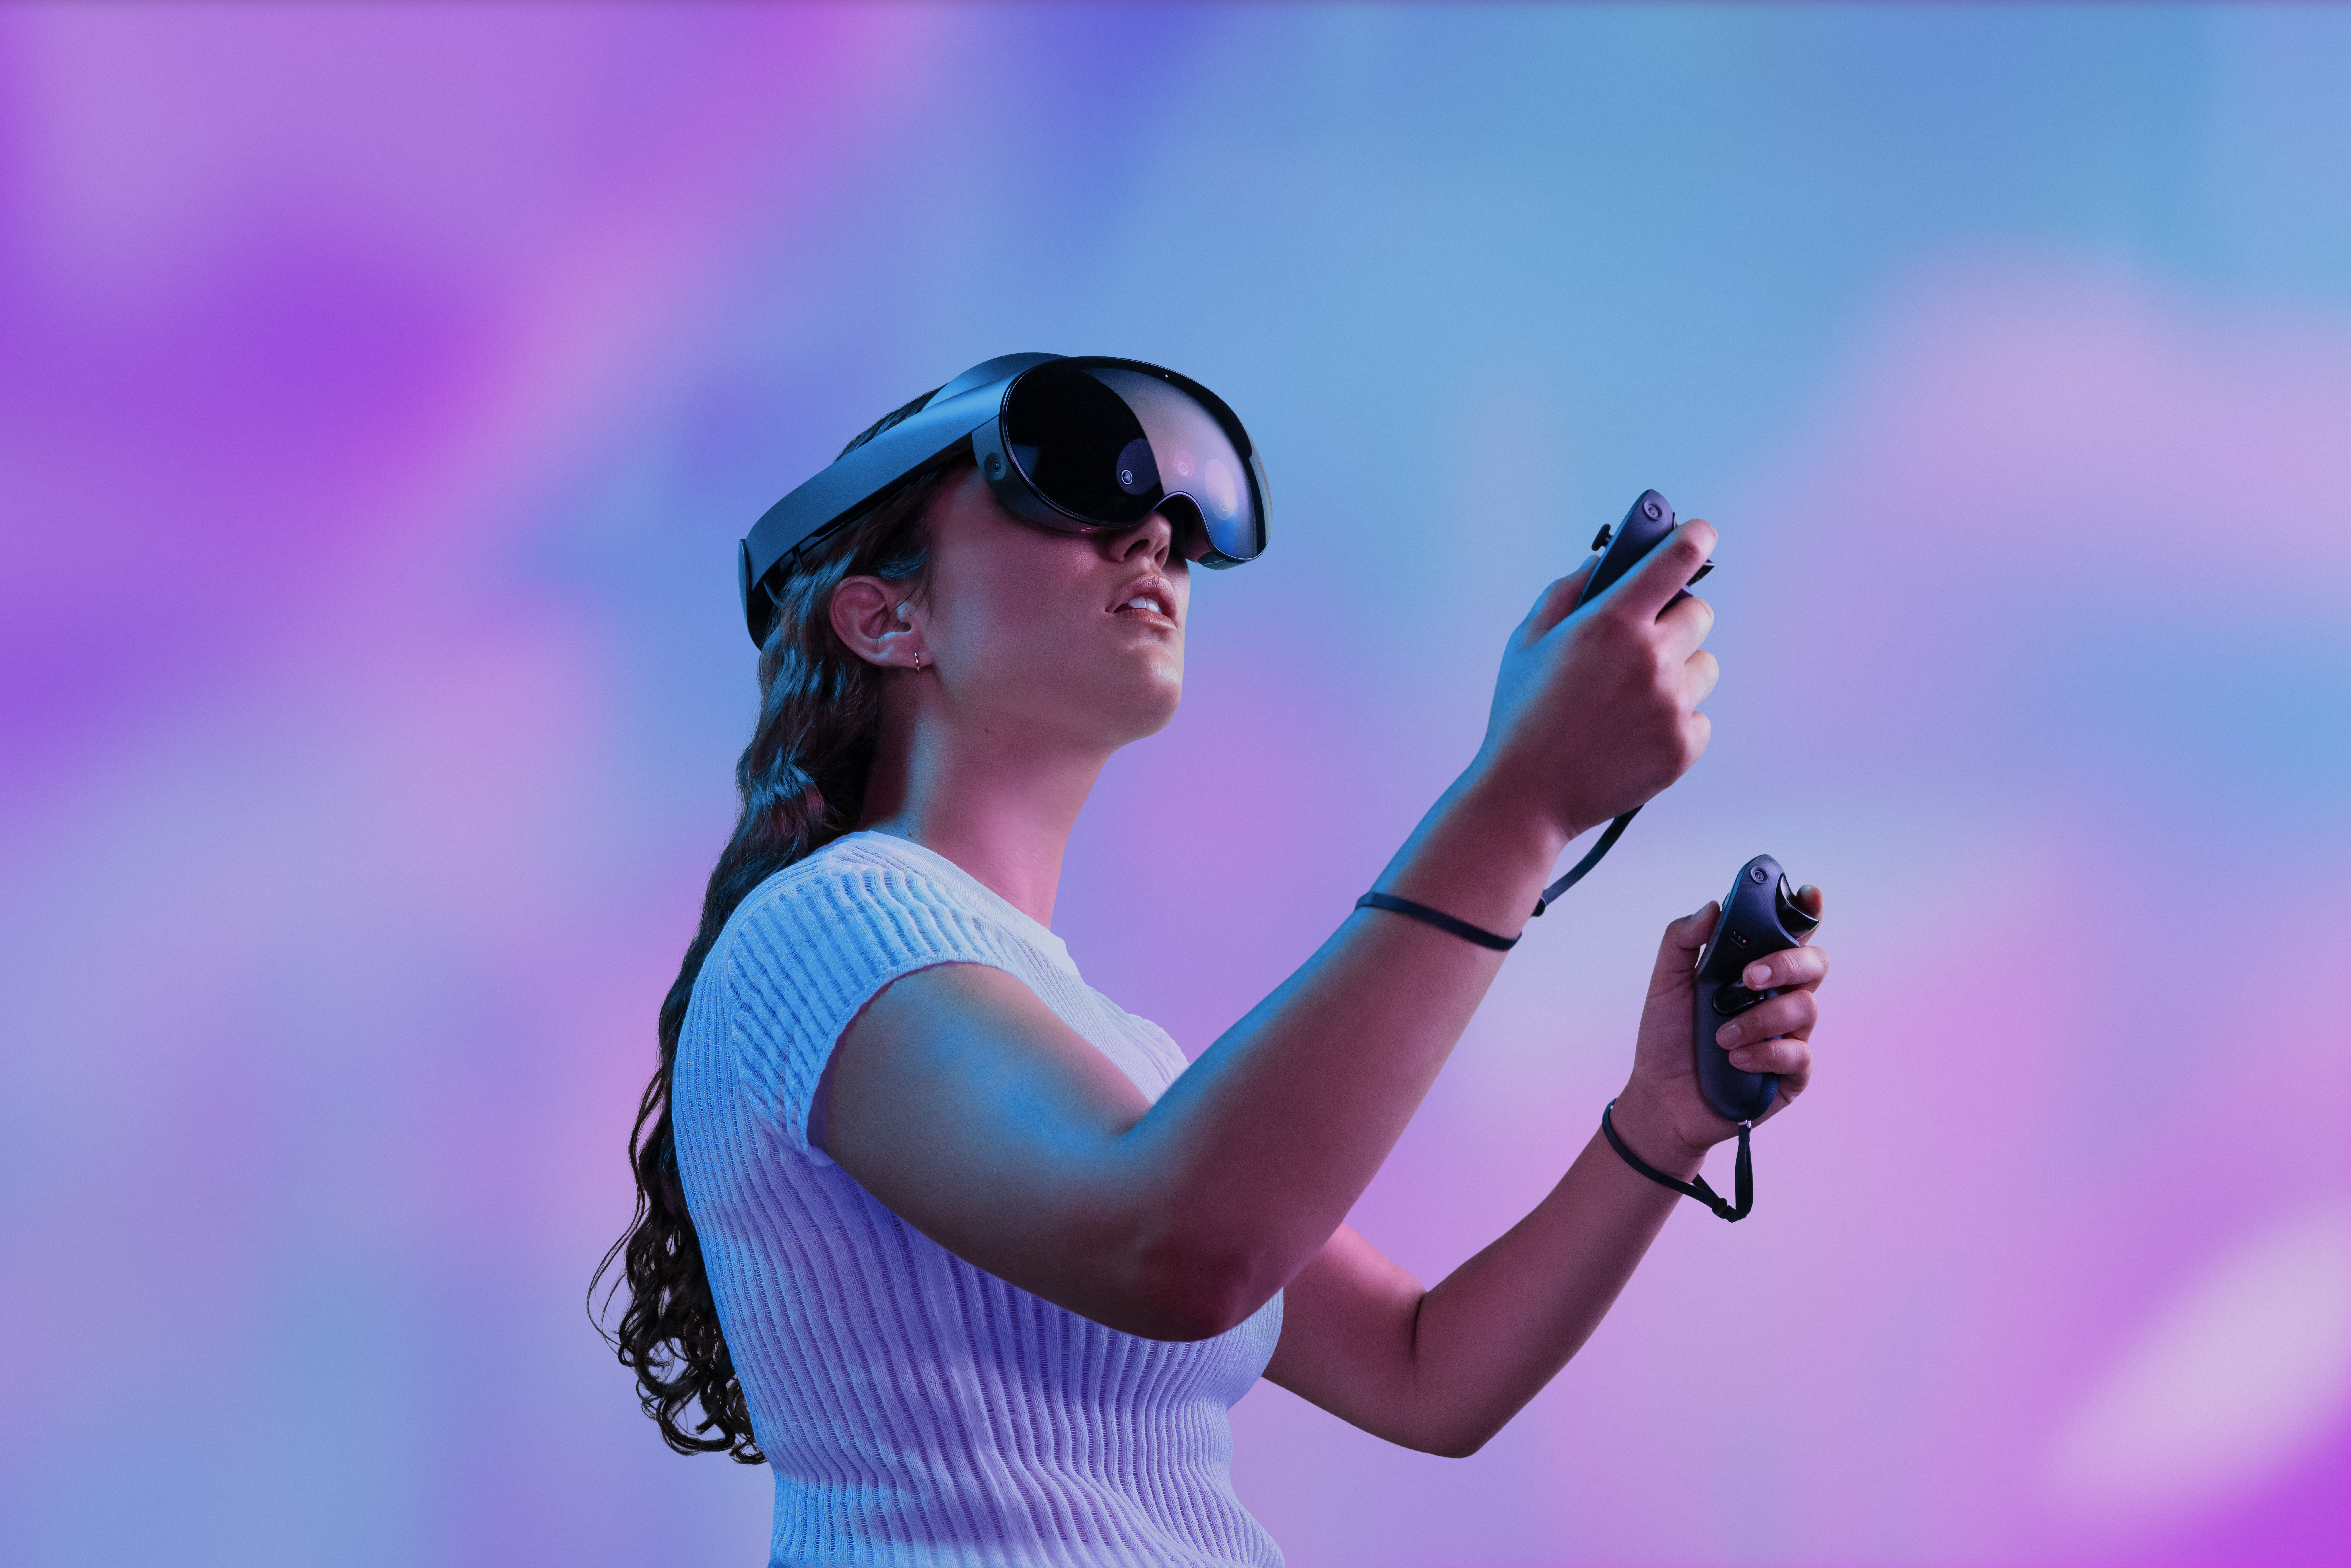 The metaverse, explained: what it is, and why tech companies love